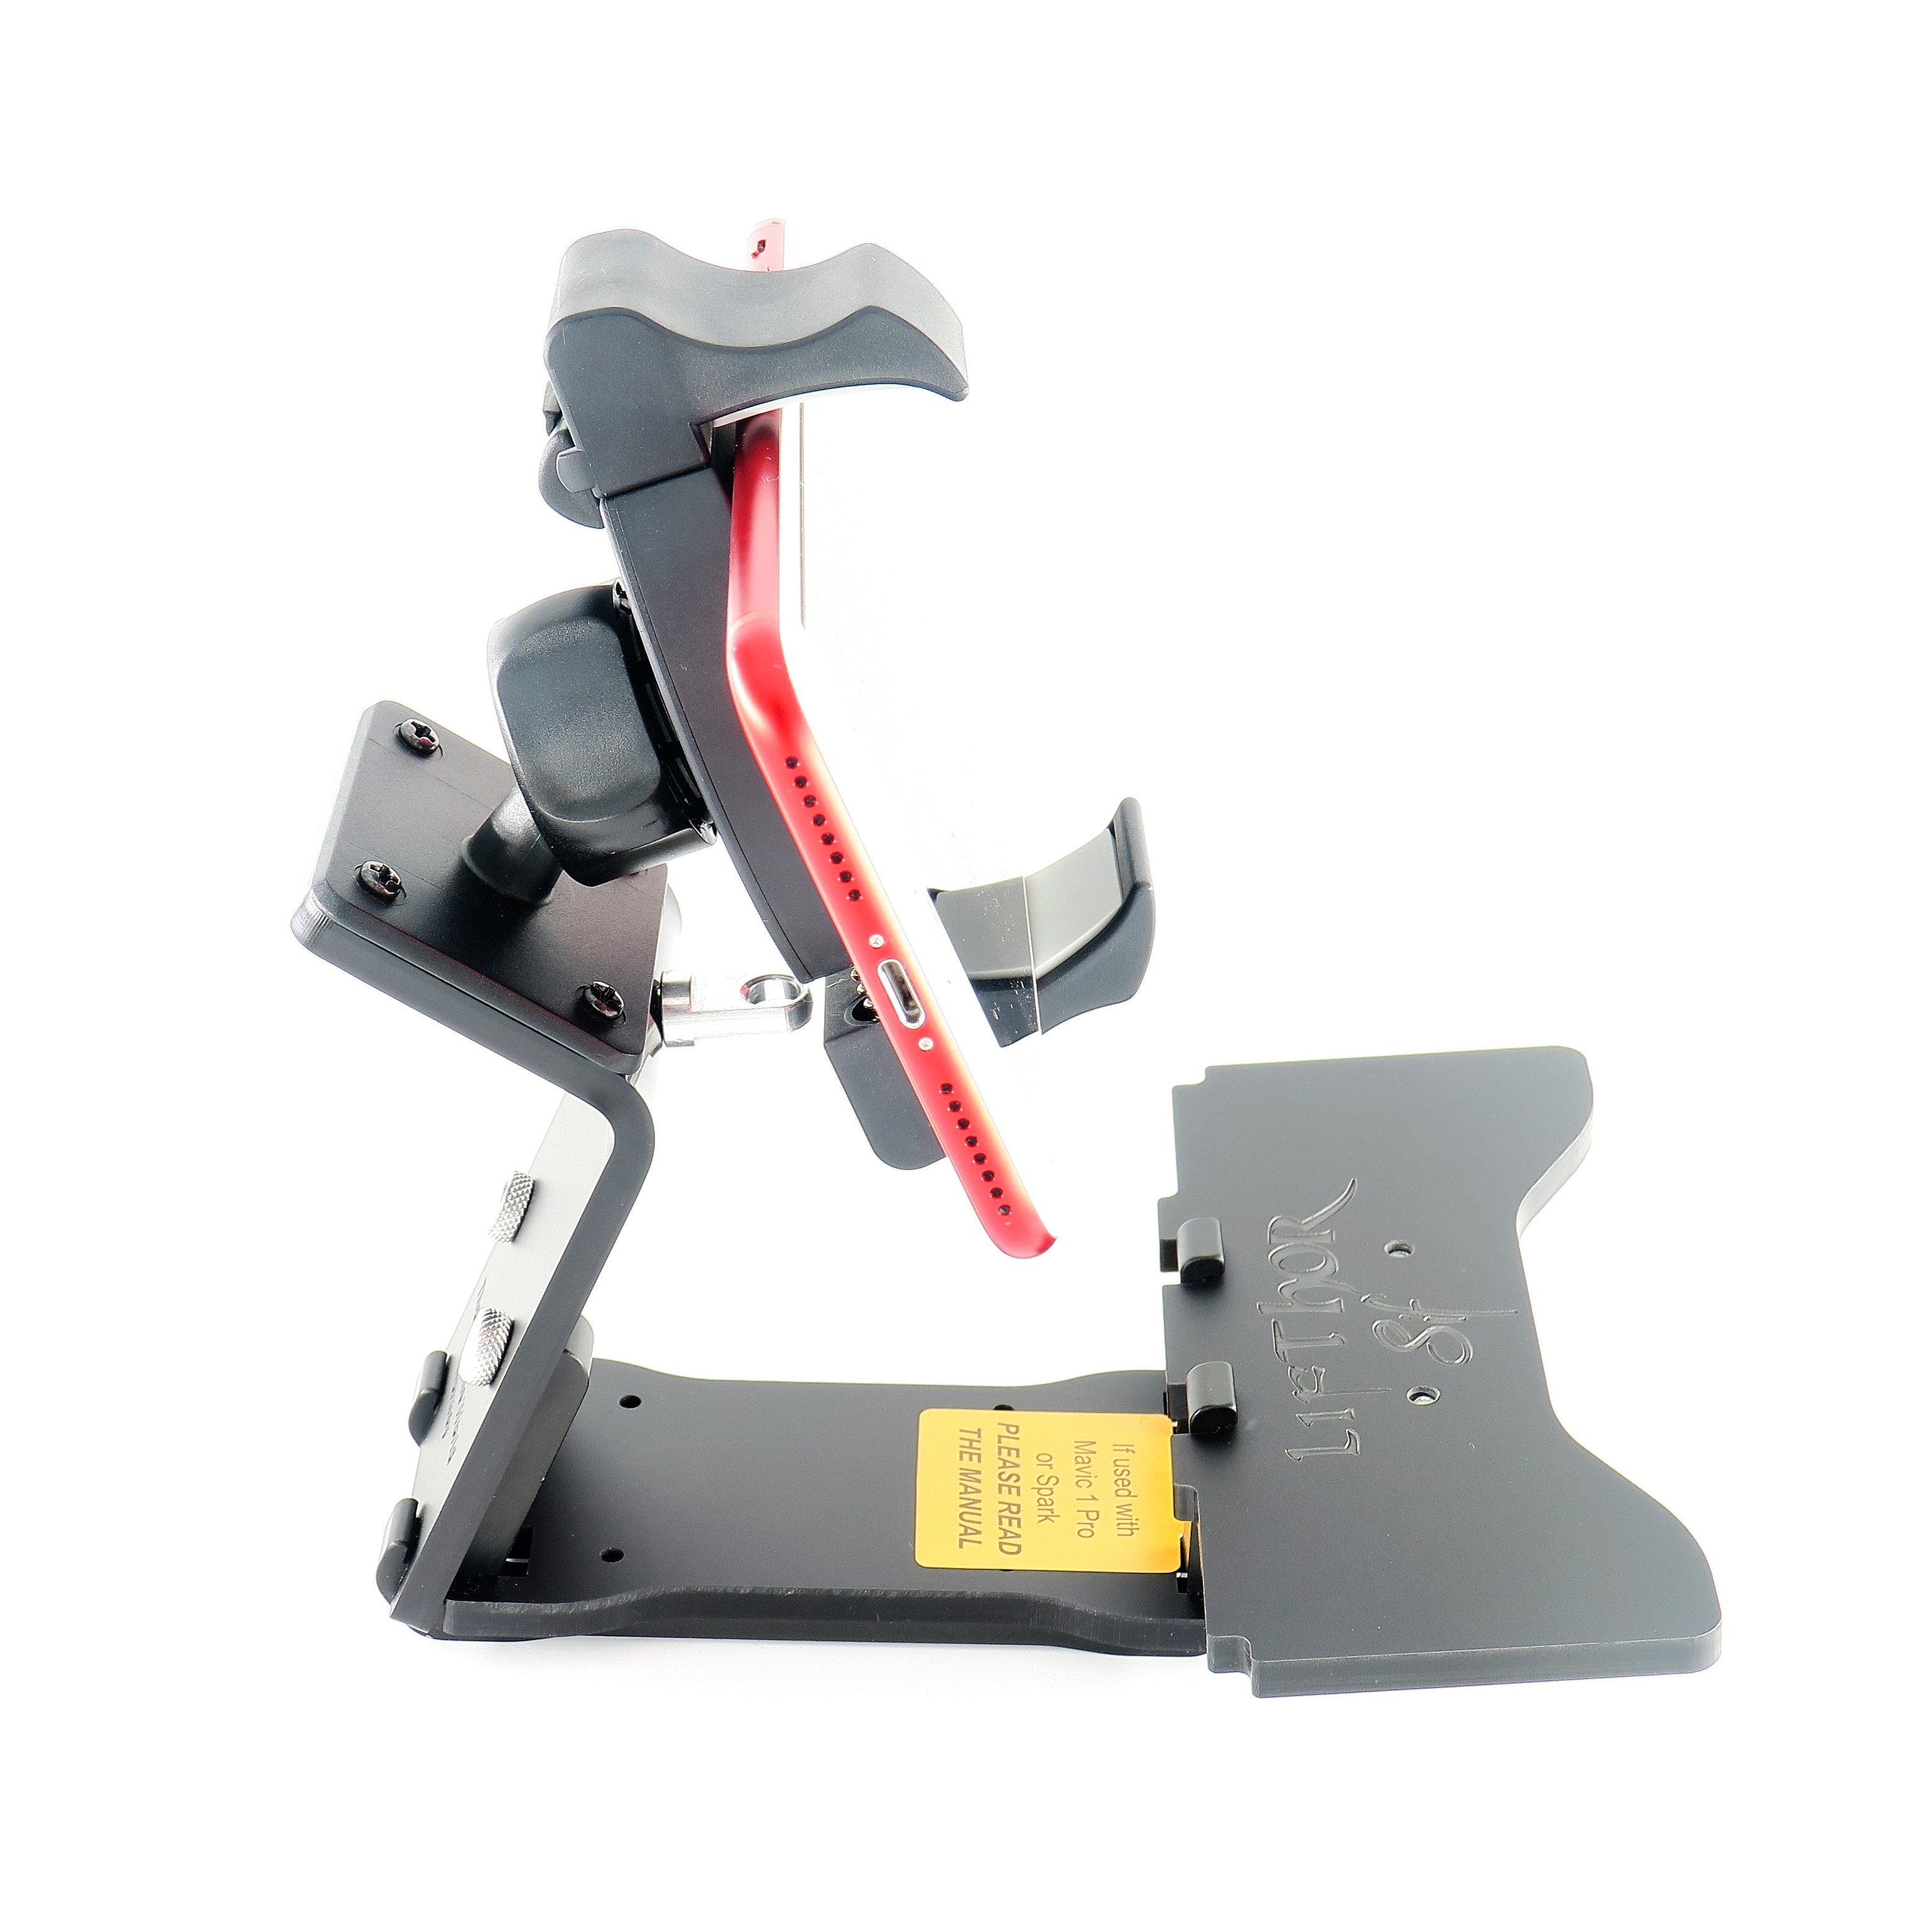 LifThor Sif phone mount for DJI Drones